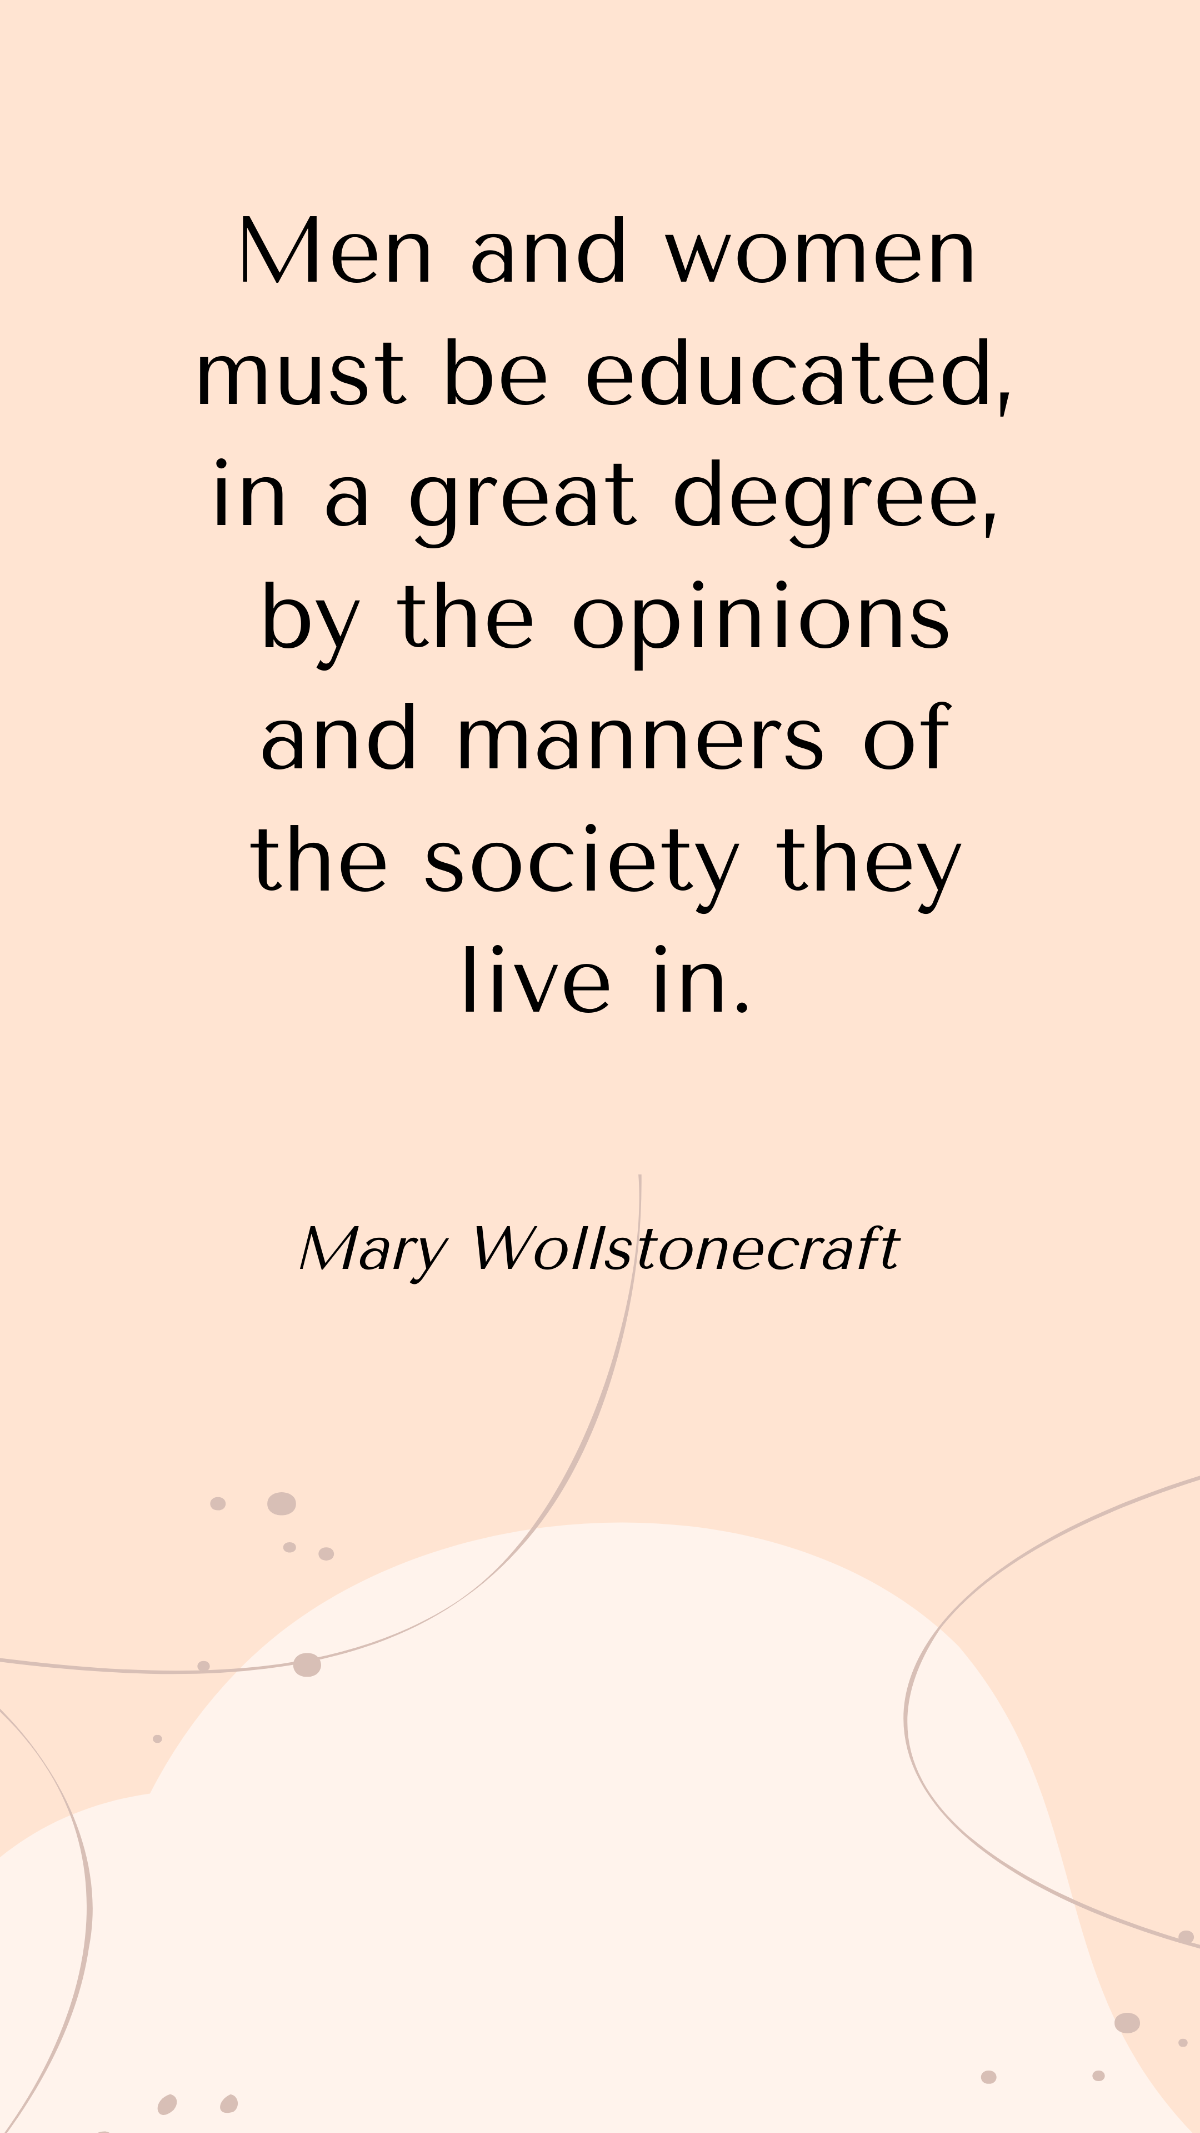 Mary Wollstonecraft - Men and women must be educated, in a great degree, by the opinions and manners of the society they live in. Template